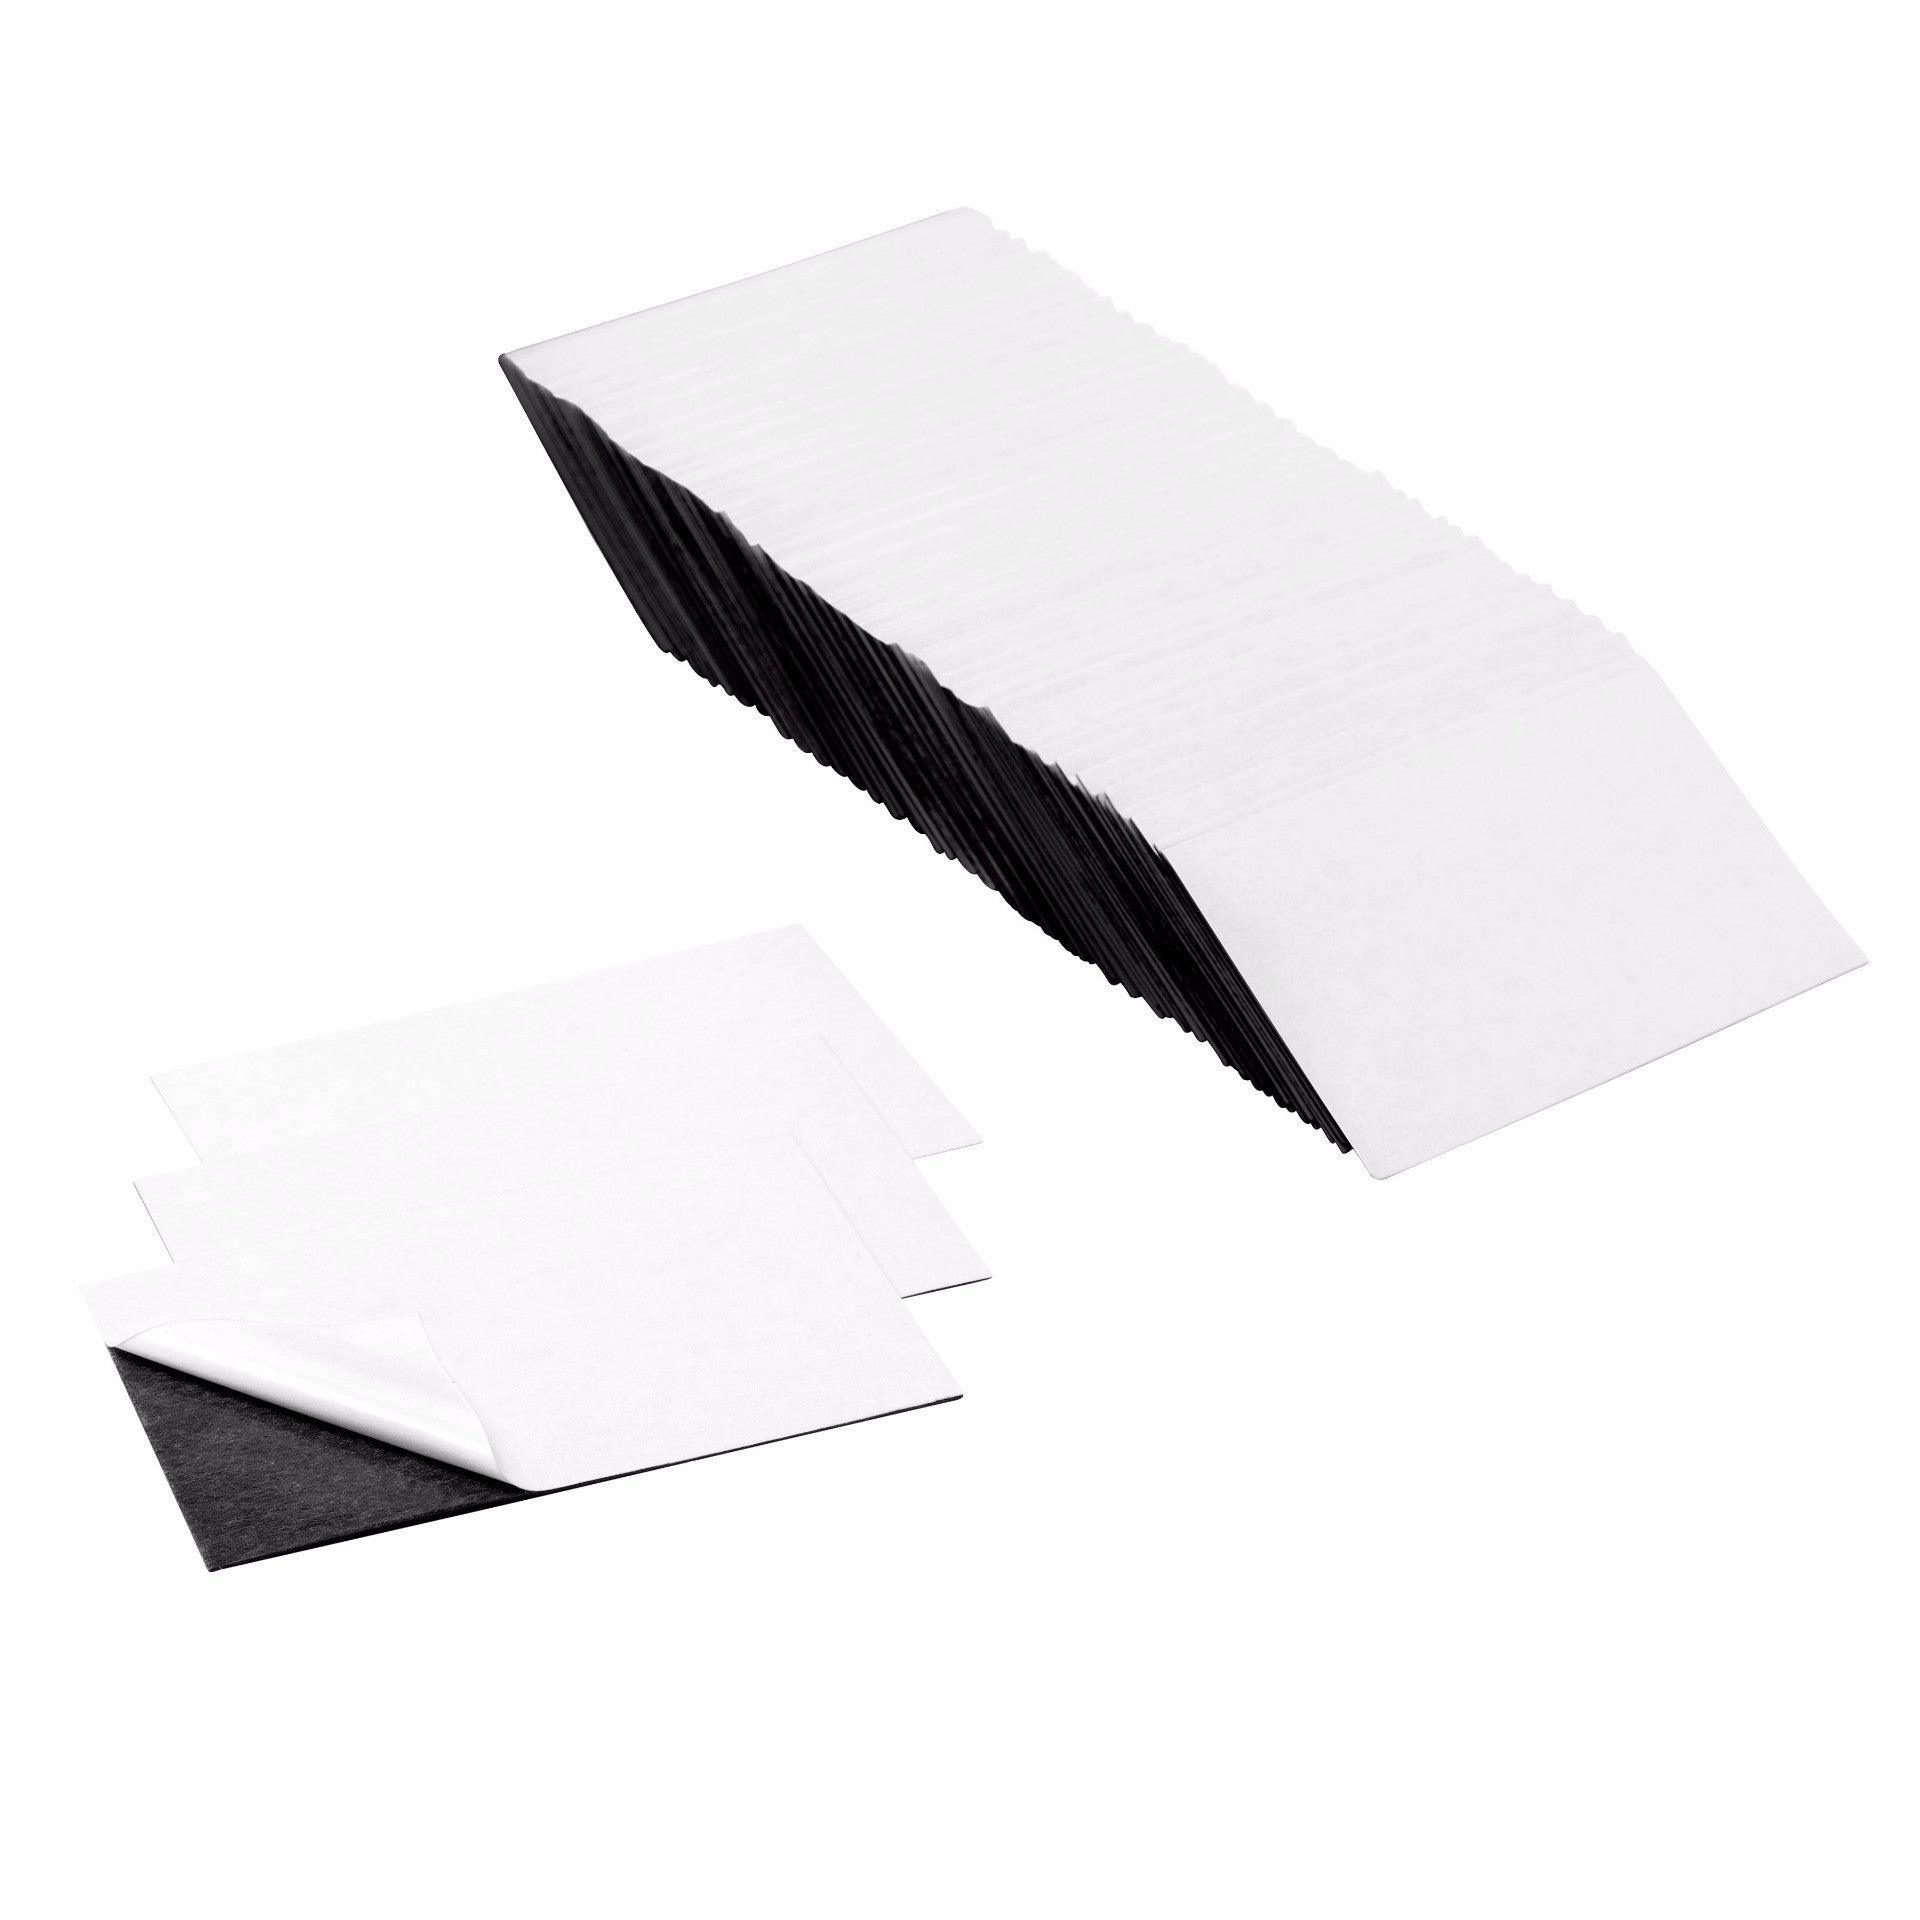 totalElement 3.5 x 2 inch Business Card Strong Flexible Self-Adhesive Magnetic Sheets Peel & Stick Refrigerator Magnet Sheets